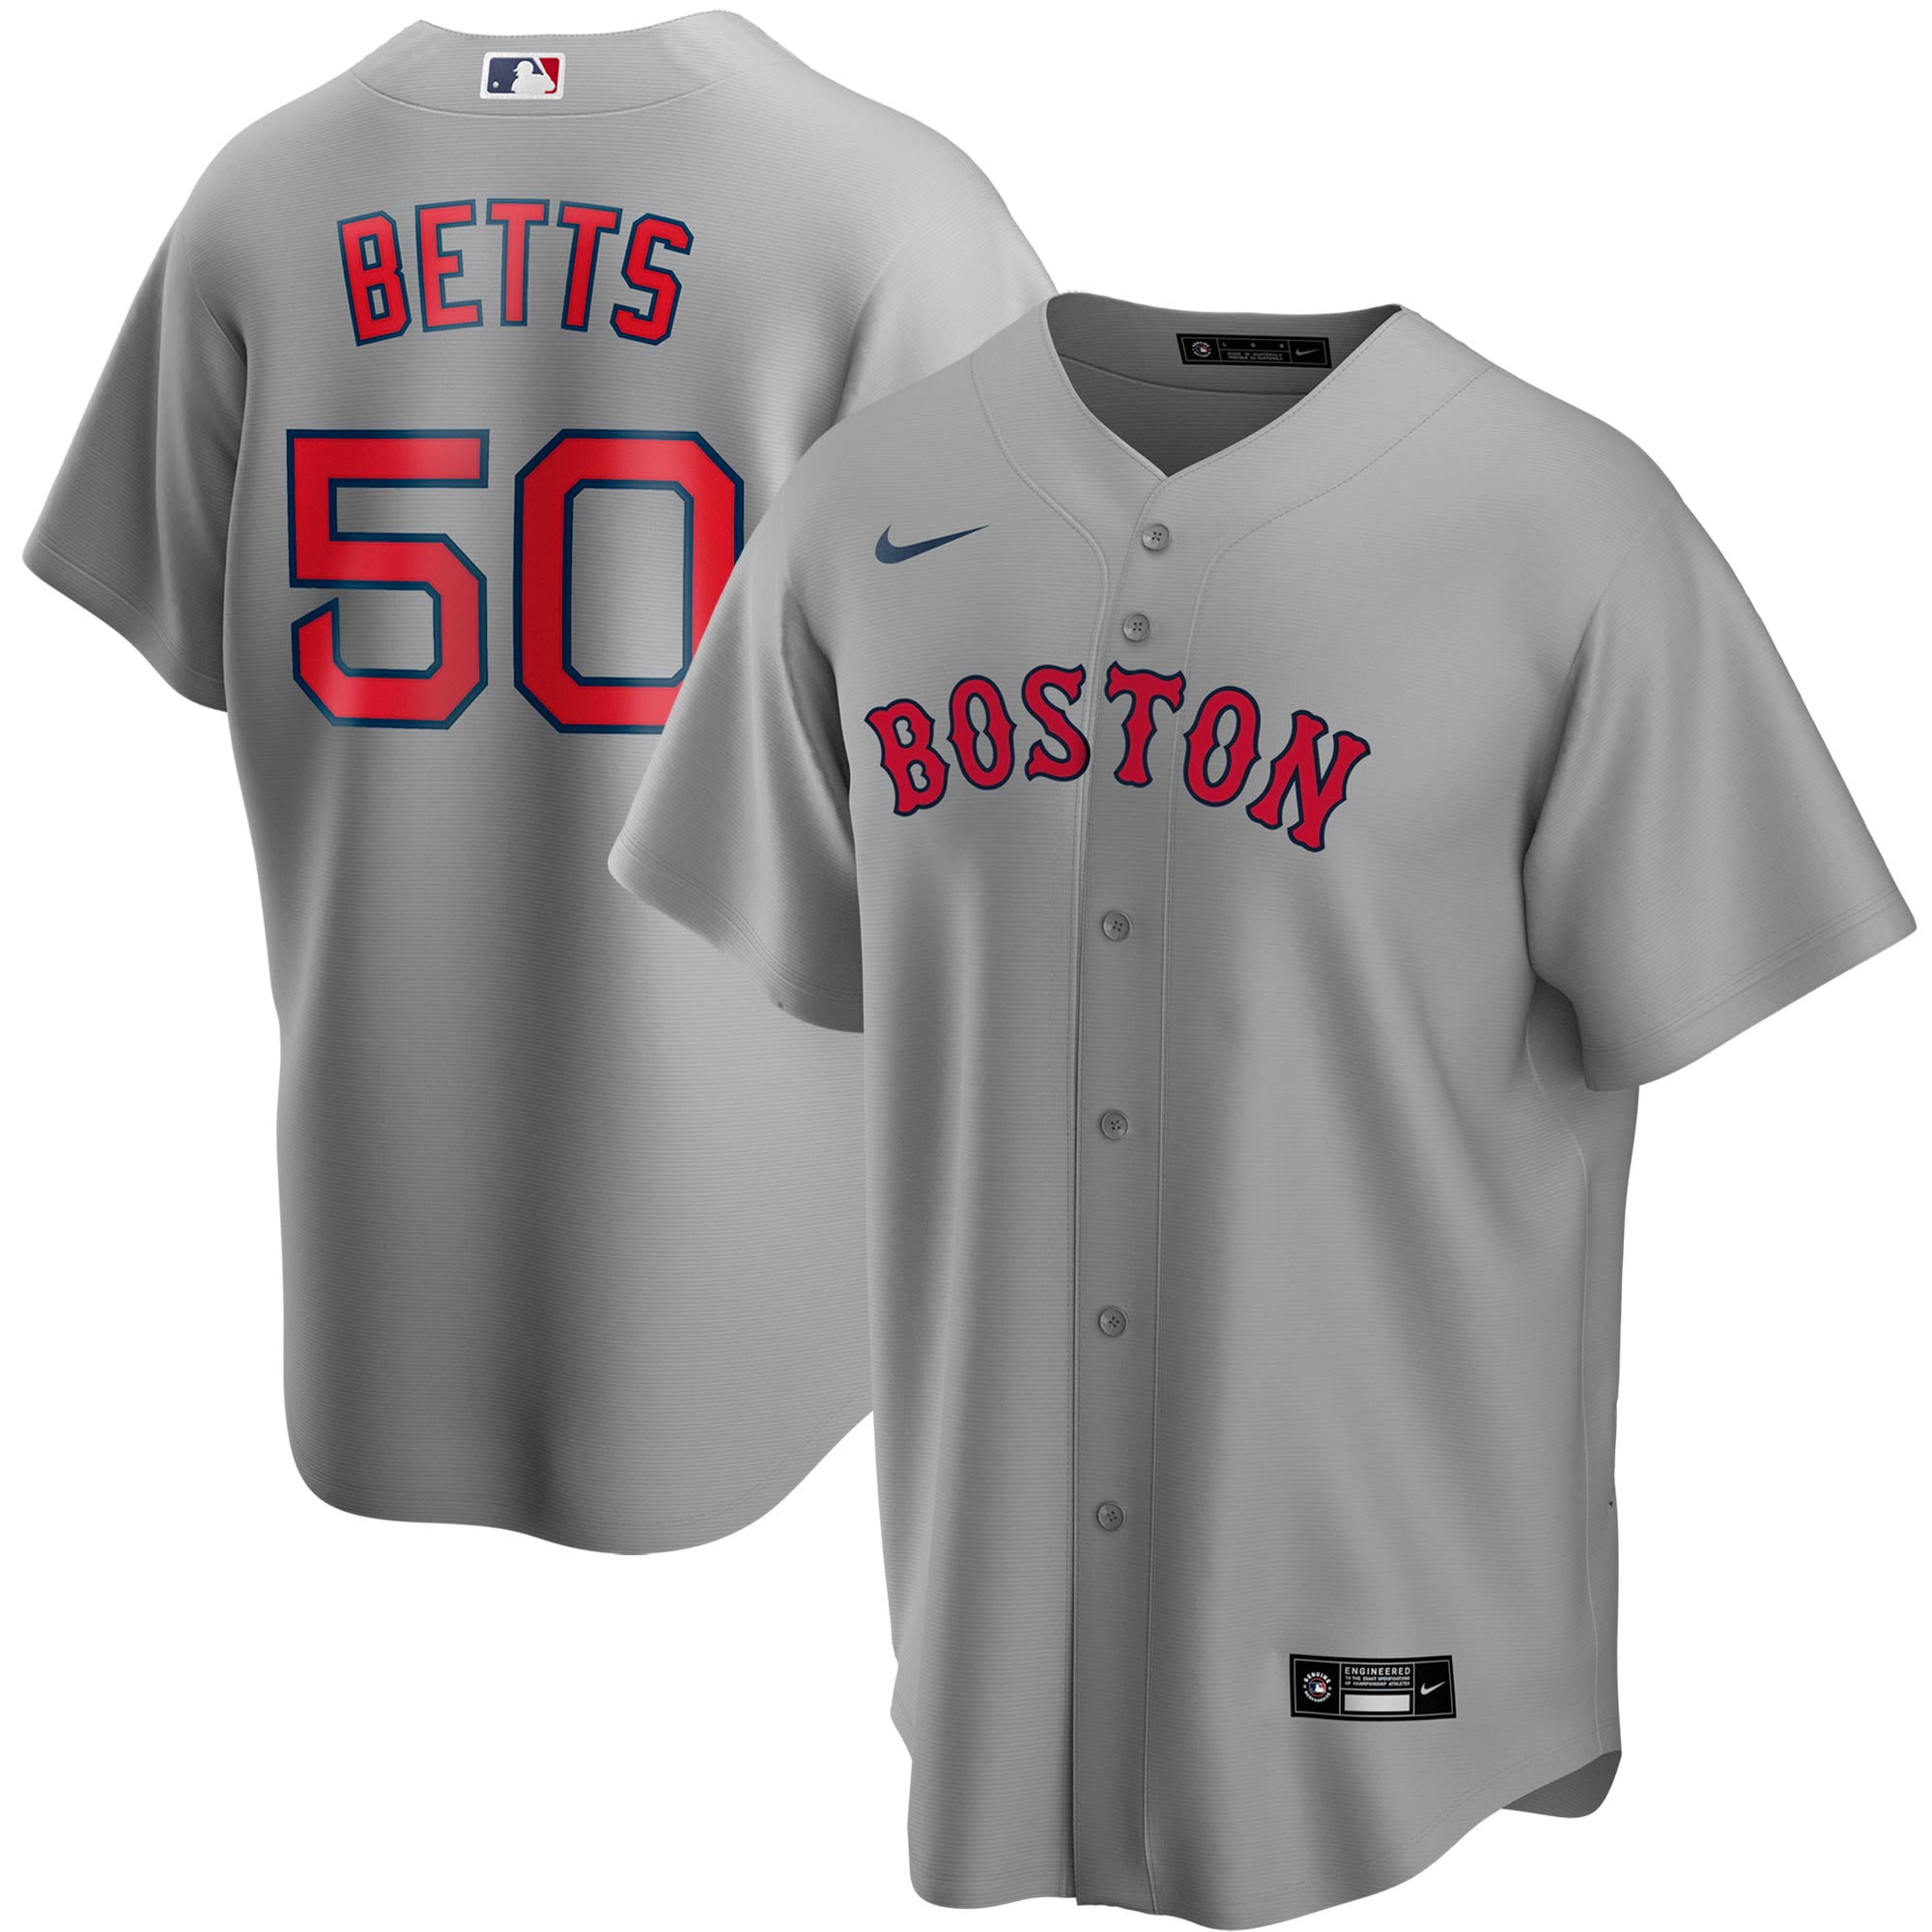 red sox mookie betts jersey